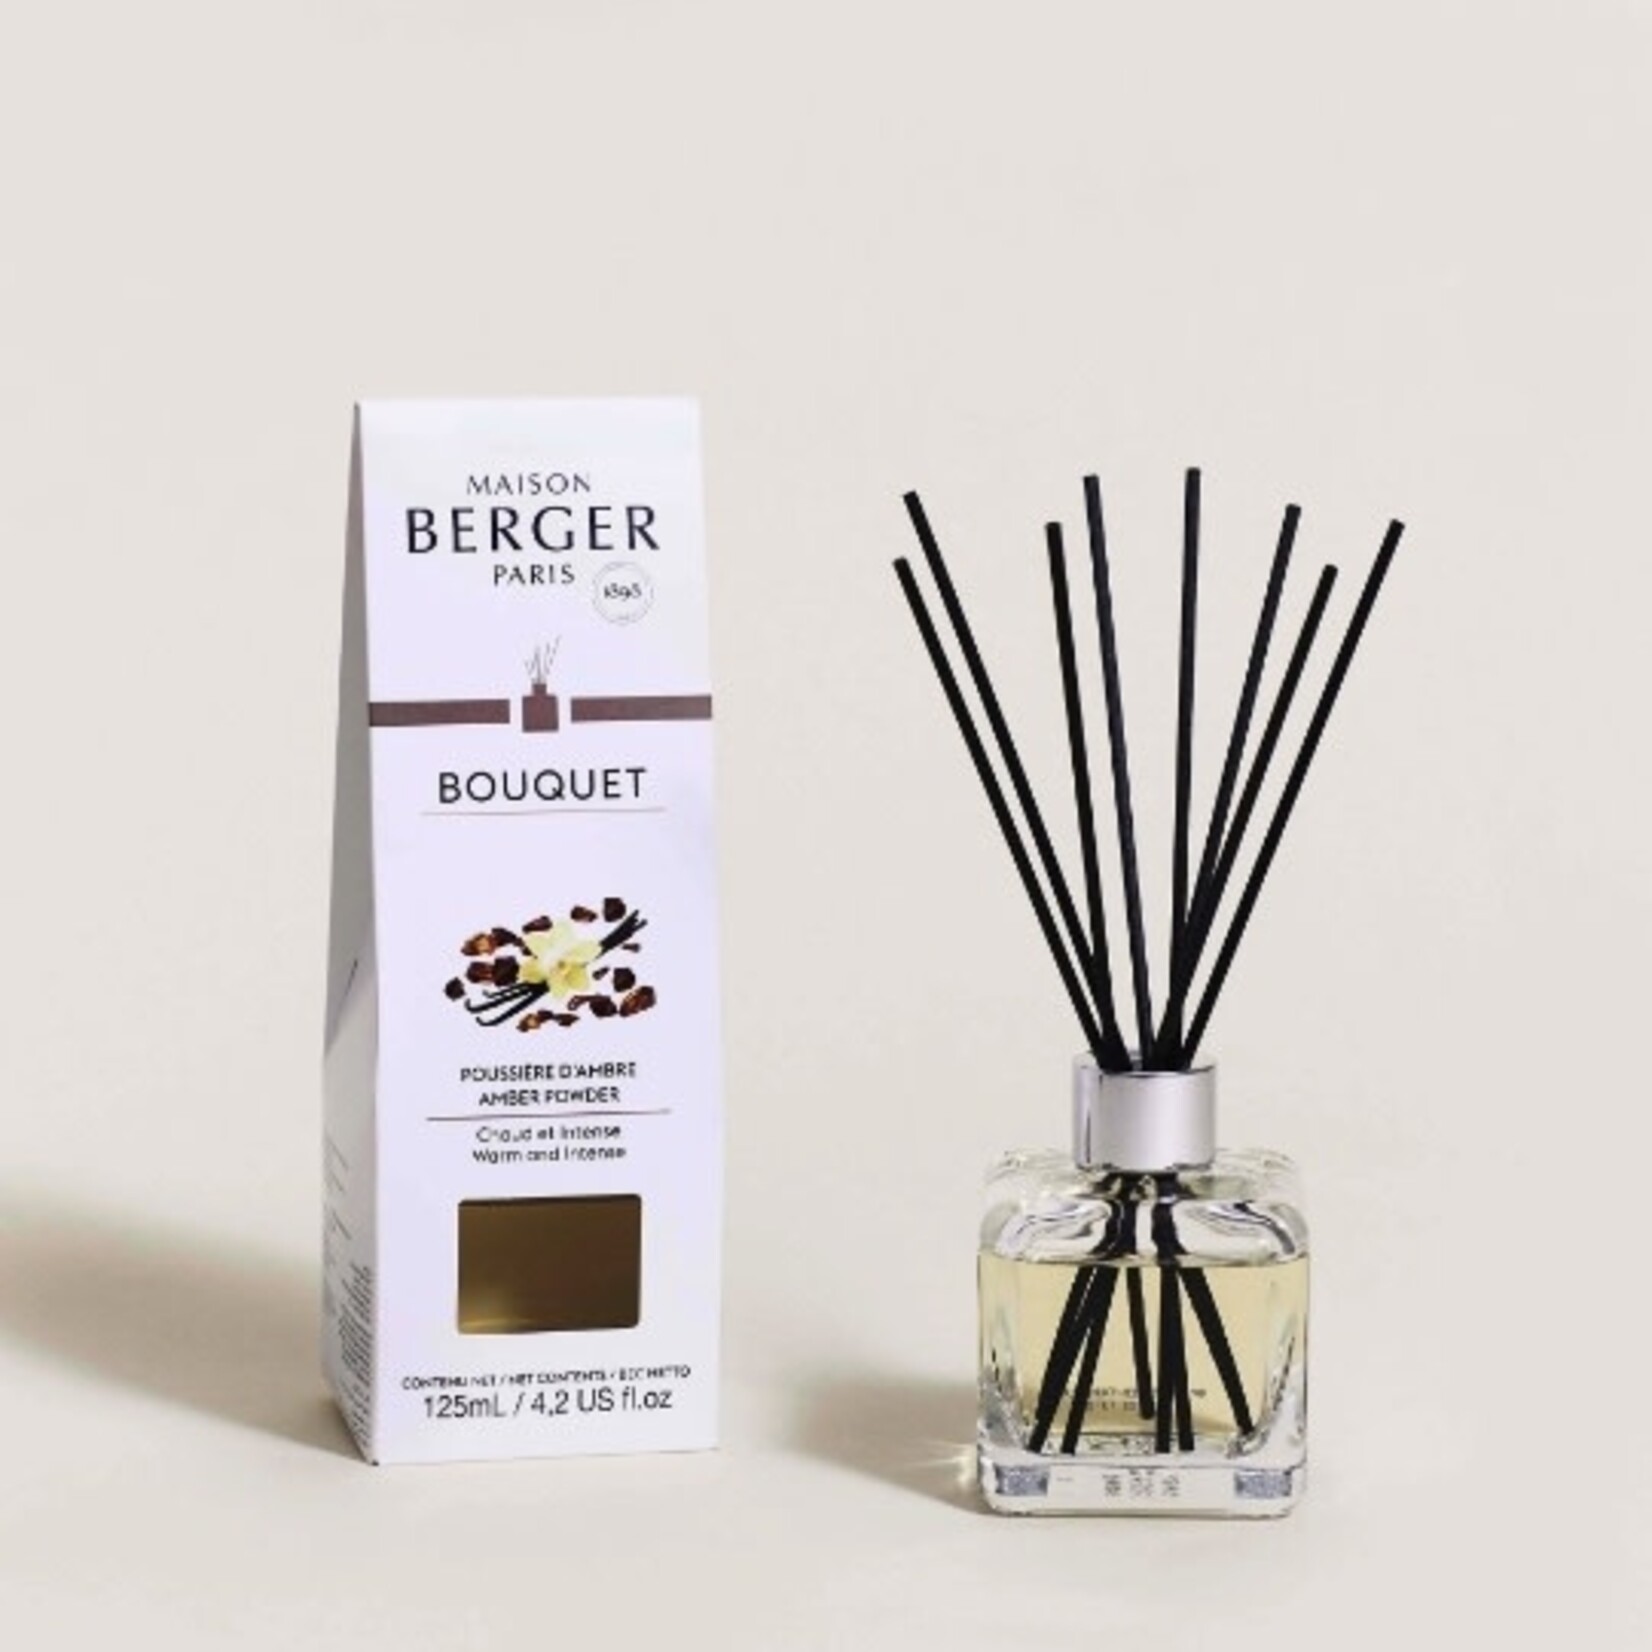 Maison Berger Paris Pre-filled Cube Reed Diffuser with AMBER POWDER